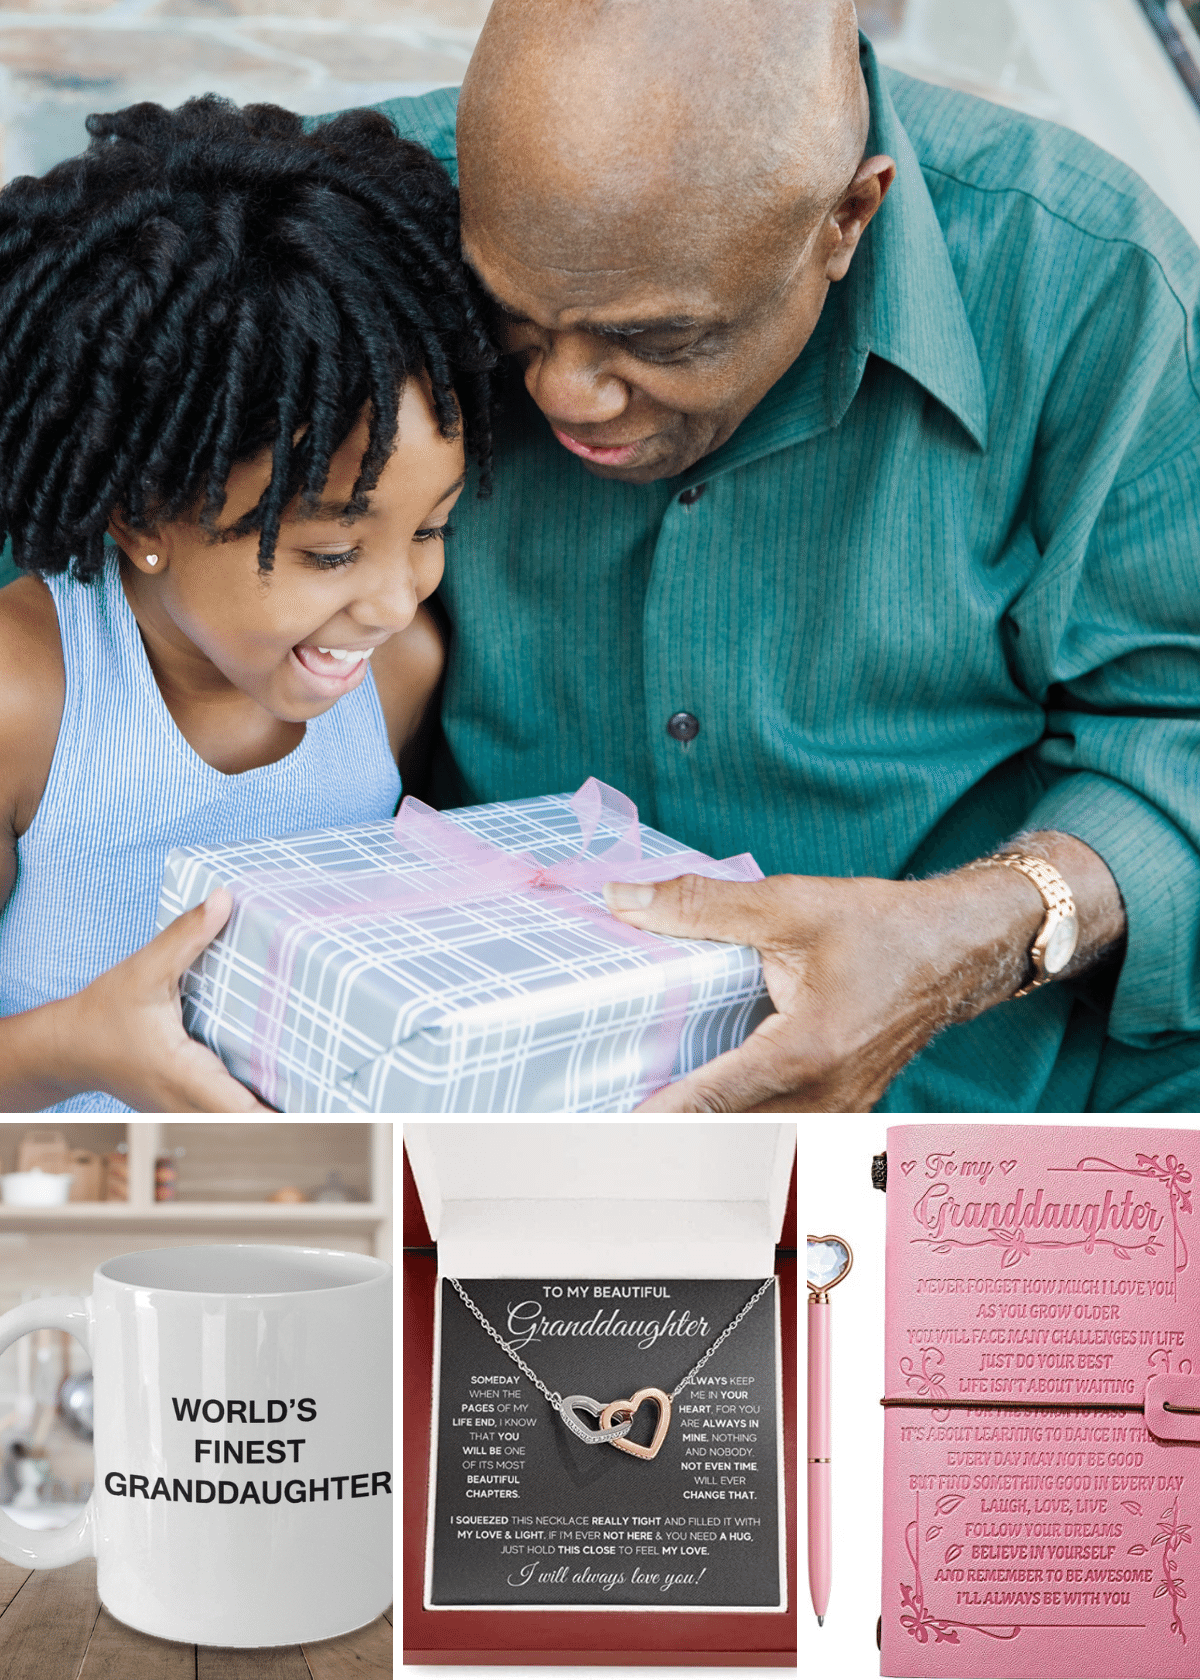 The Best Birthday Gifts for Your Granddaughter